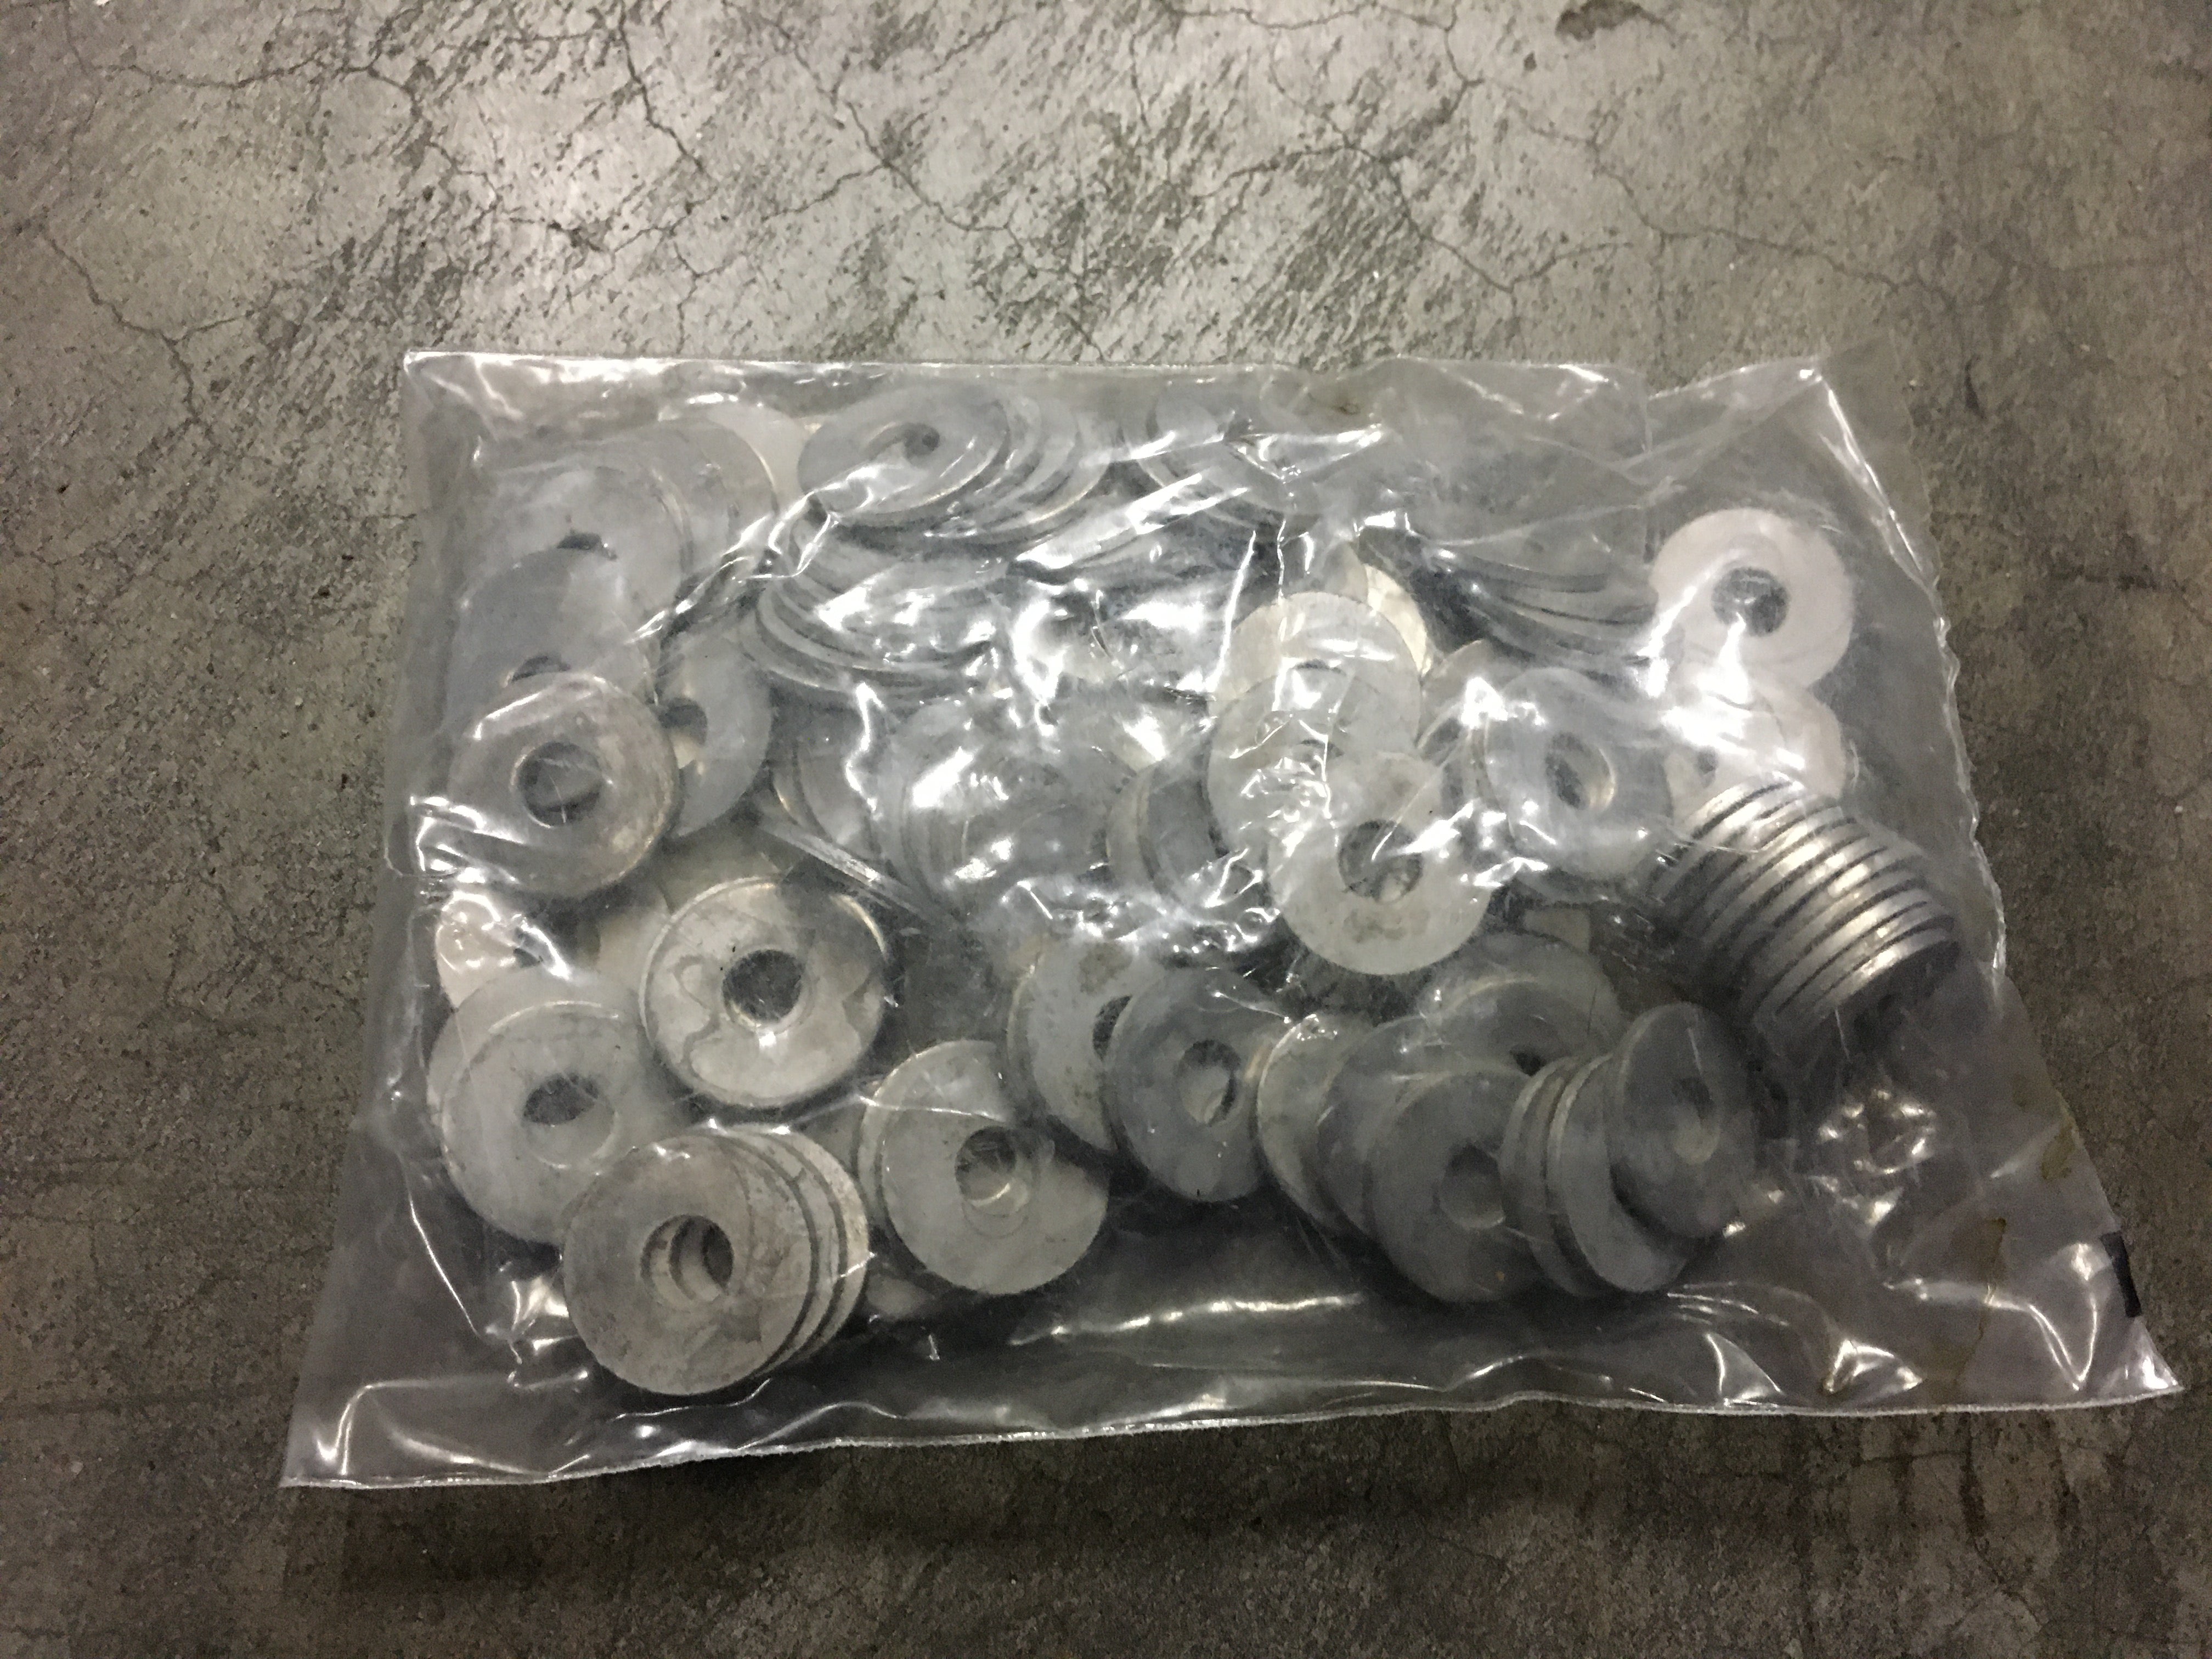 (100) 3/4" NAS70-261-750 Flat Washer Cadmium Silver Finish, Made in USA, Military Spec